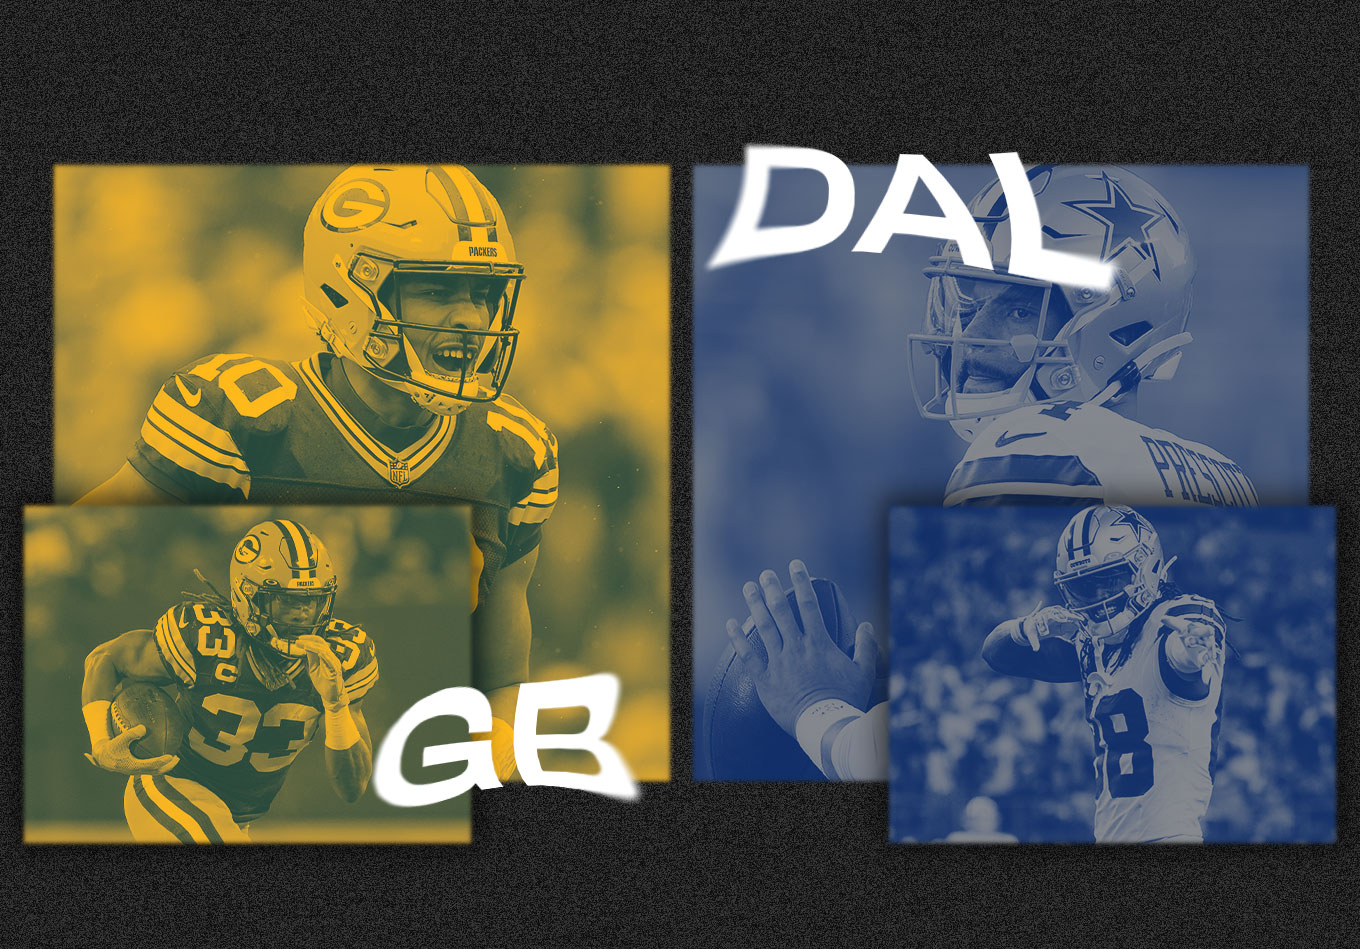 Cowboys vs Packers: Longtime NFC Rivals Have Room for More Fireworks on Super Wild-Card Weekend